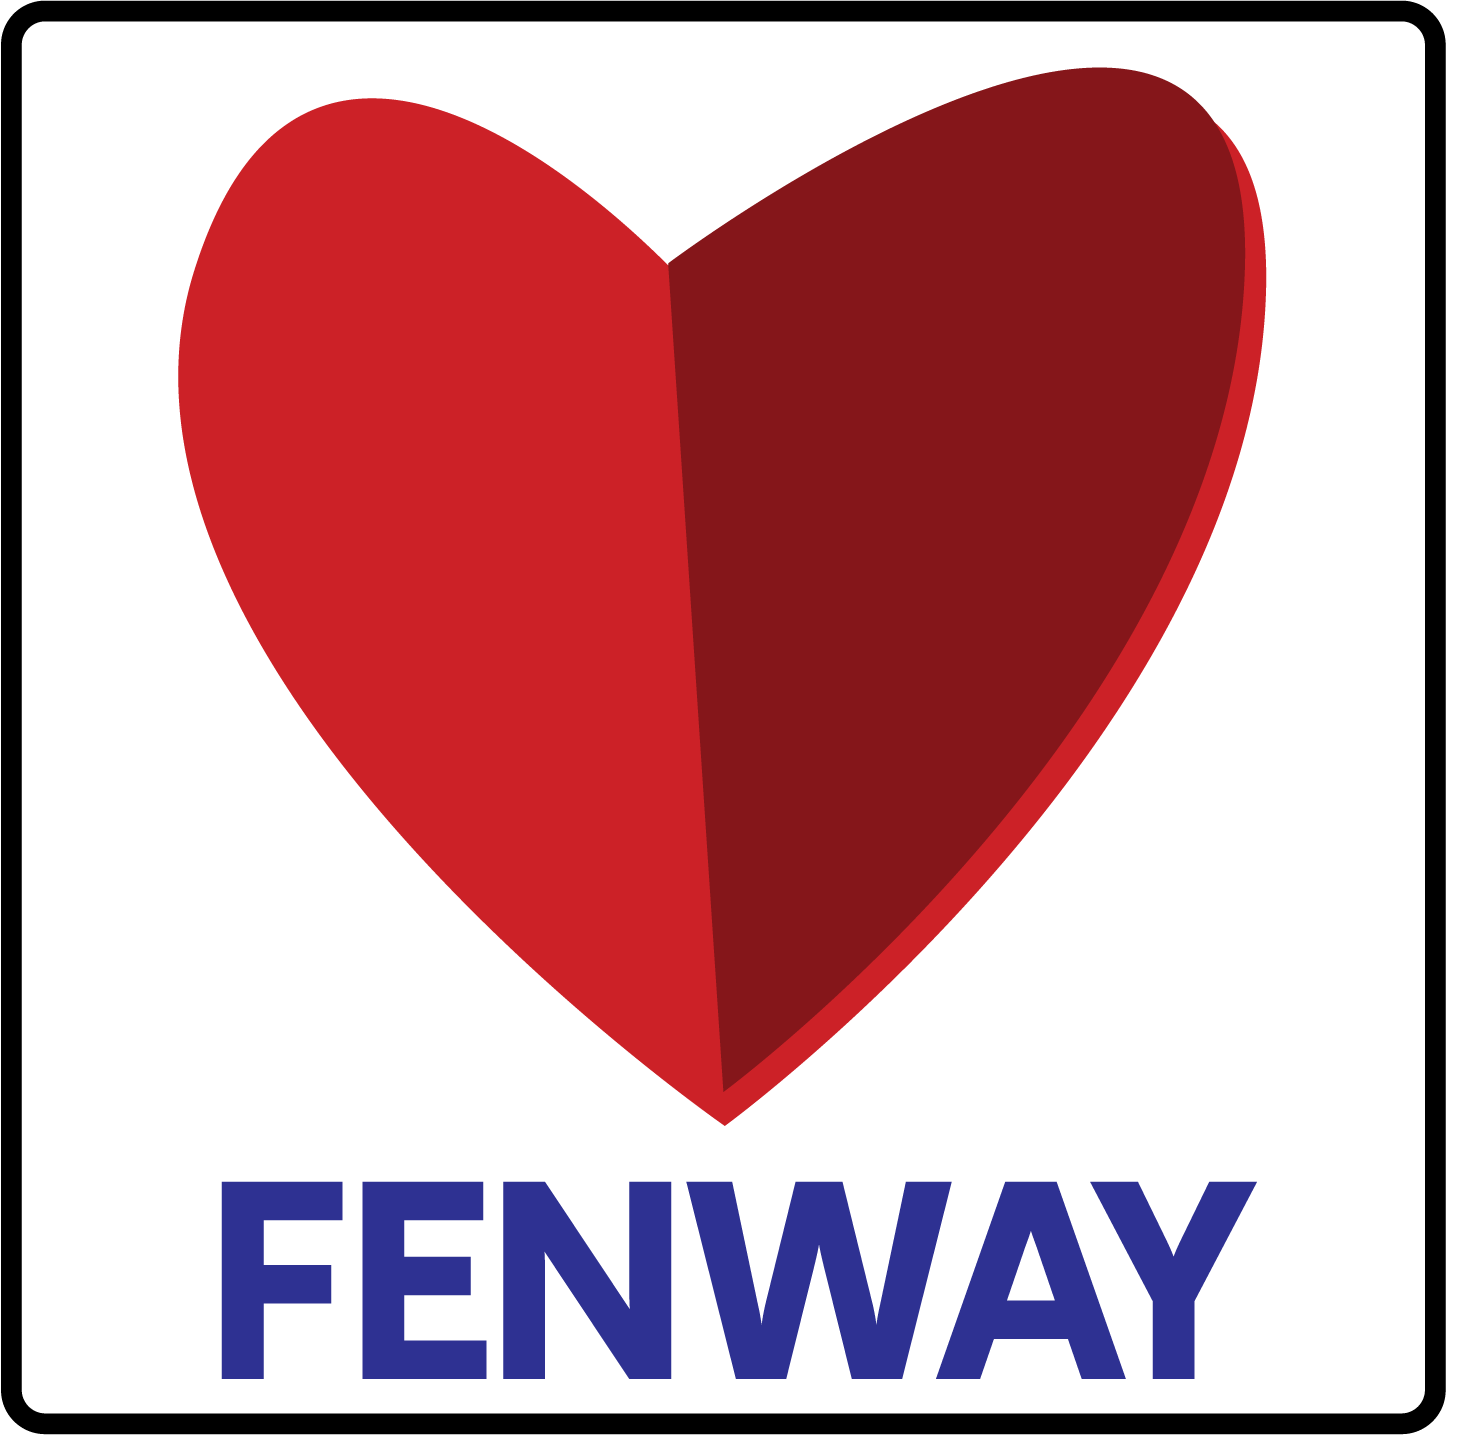 design of of a square vinyl sticker with the word FENWAY and a heart in the style of the boston citgo sign